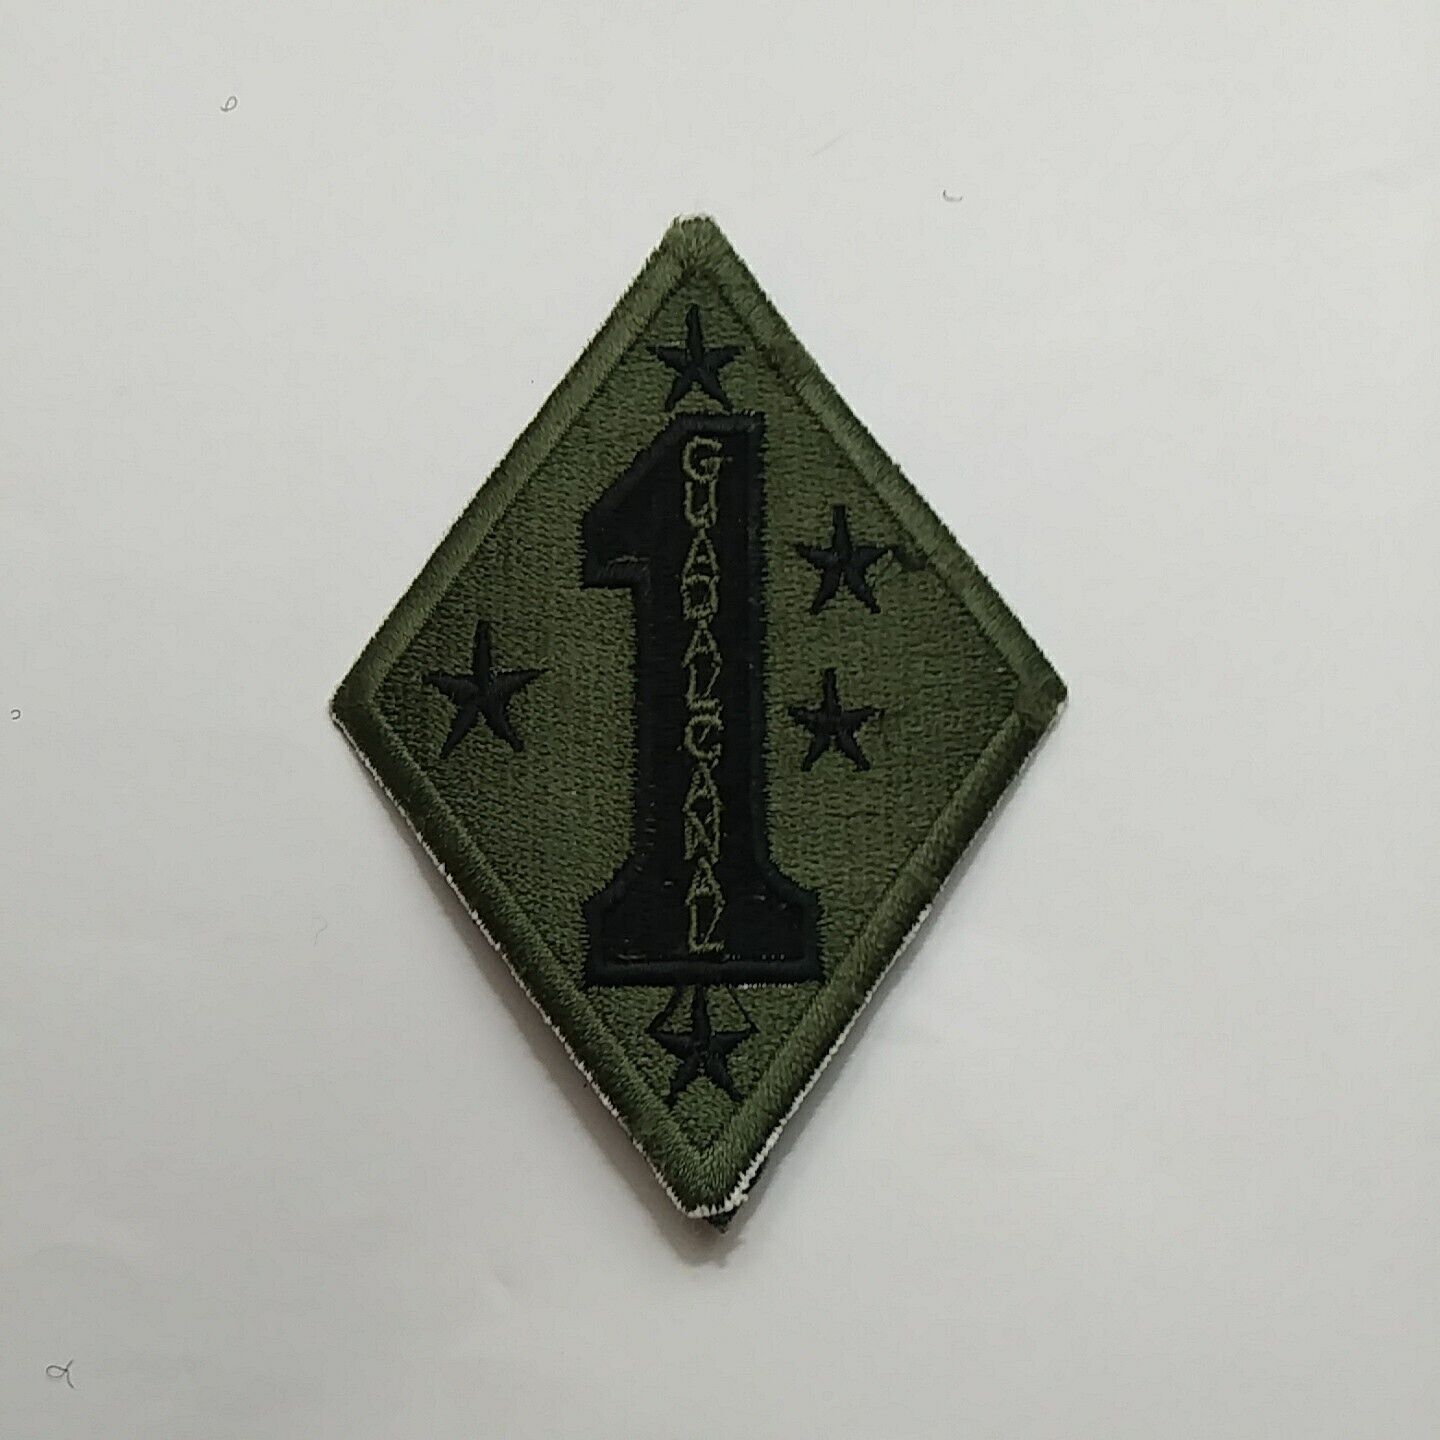 IRAQ Made 1st Marine Division SSI shoulder sleeve Patch in country (USFLA)